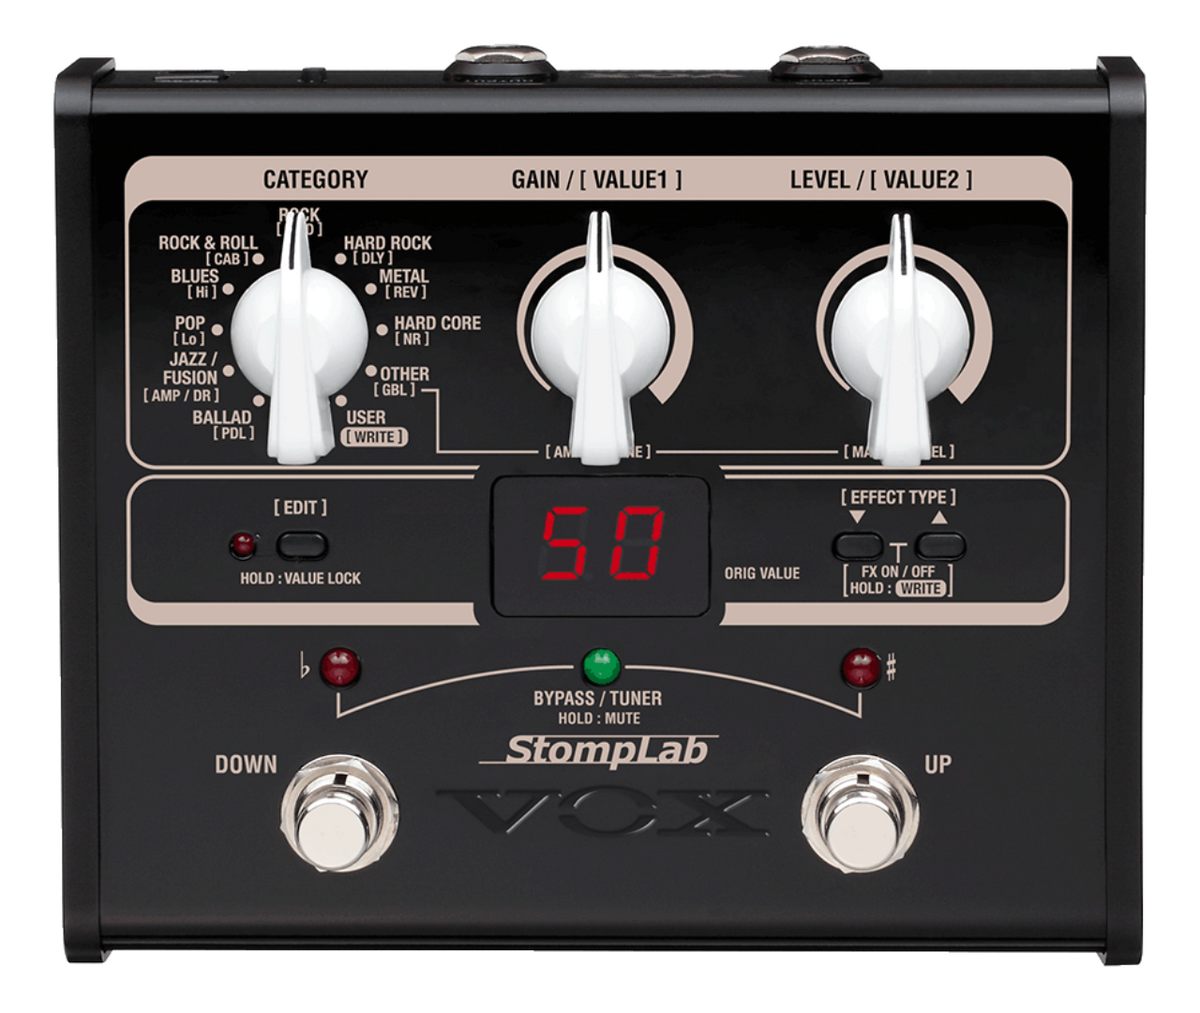 VOX Multi Effects Stomplab 1G Guitar Multi-effects Pedal with 103 Modeling Effects and Noise Reduction